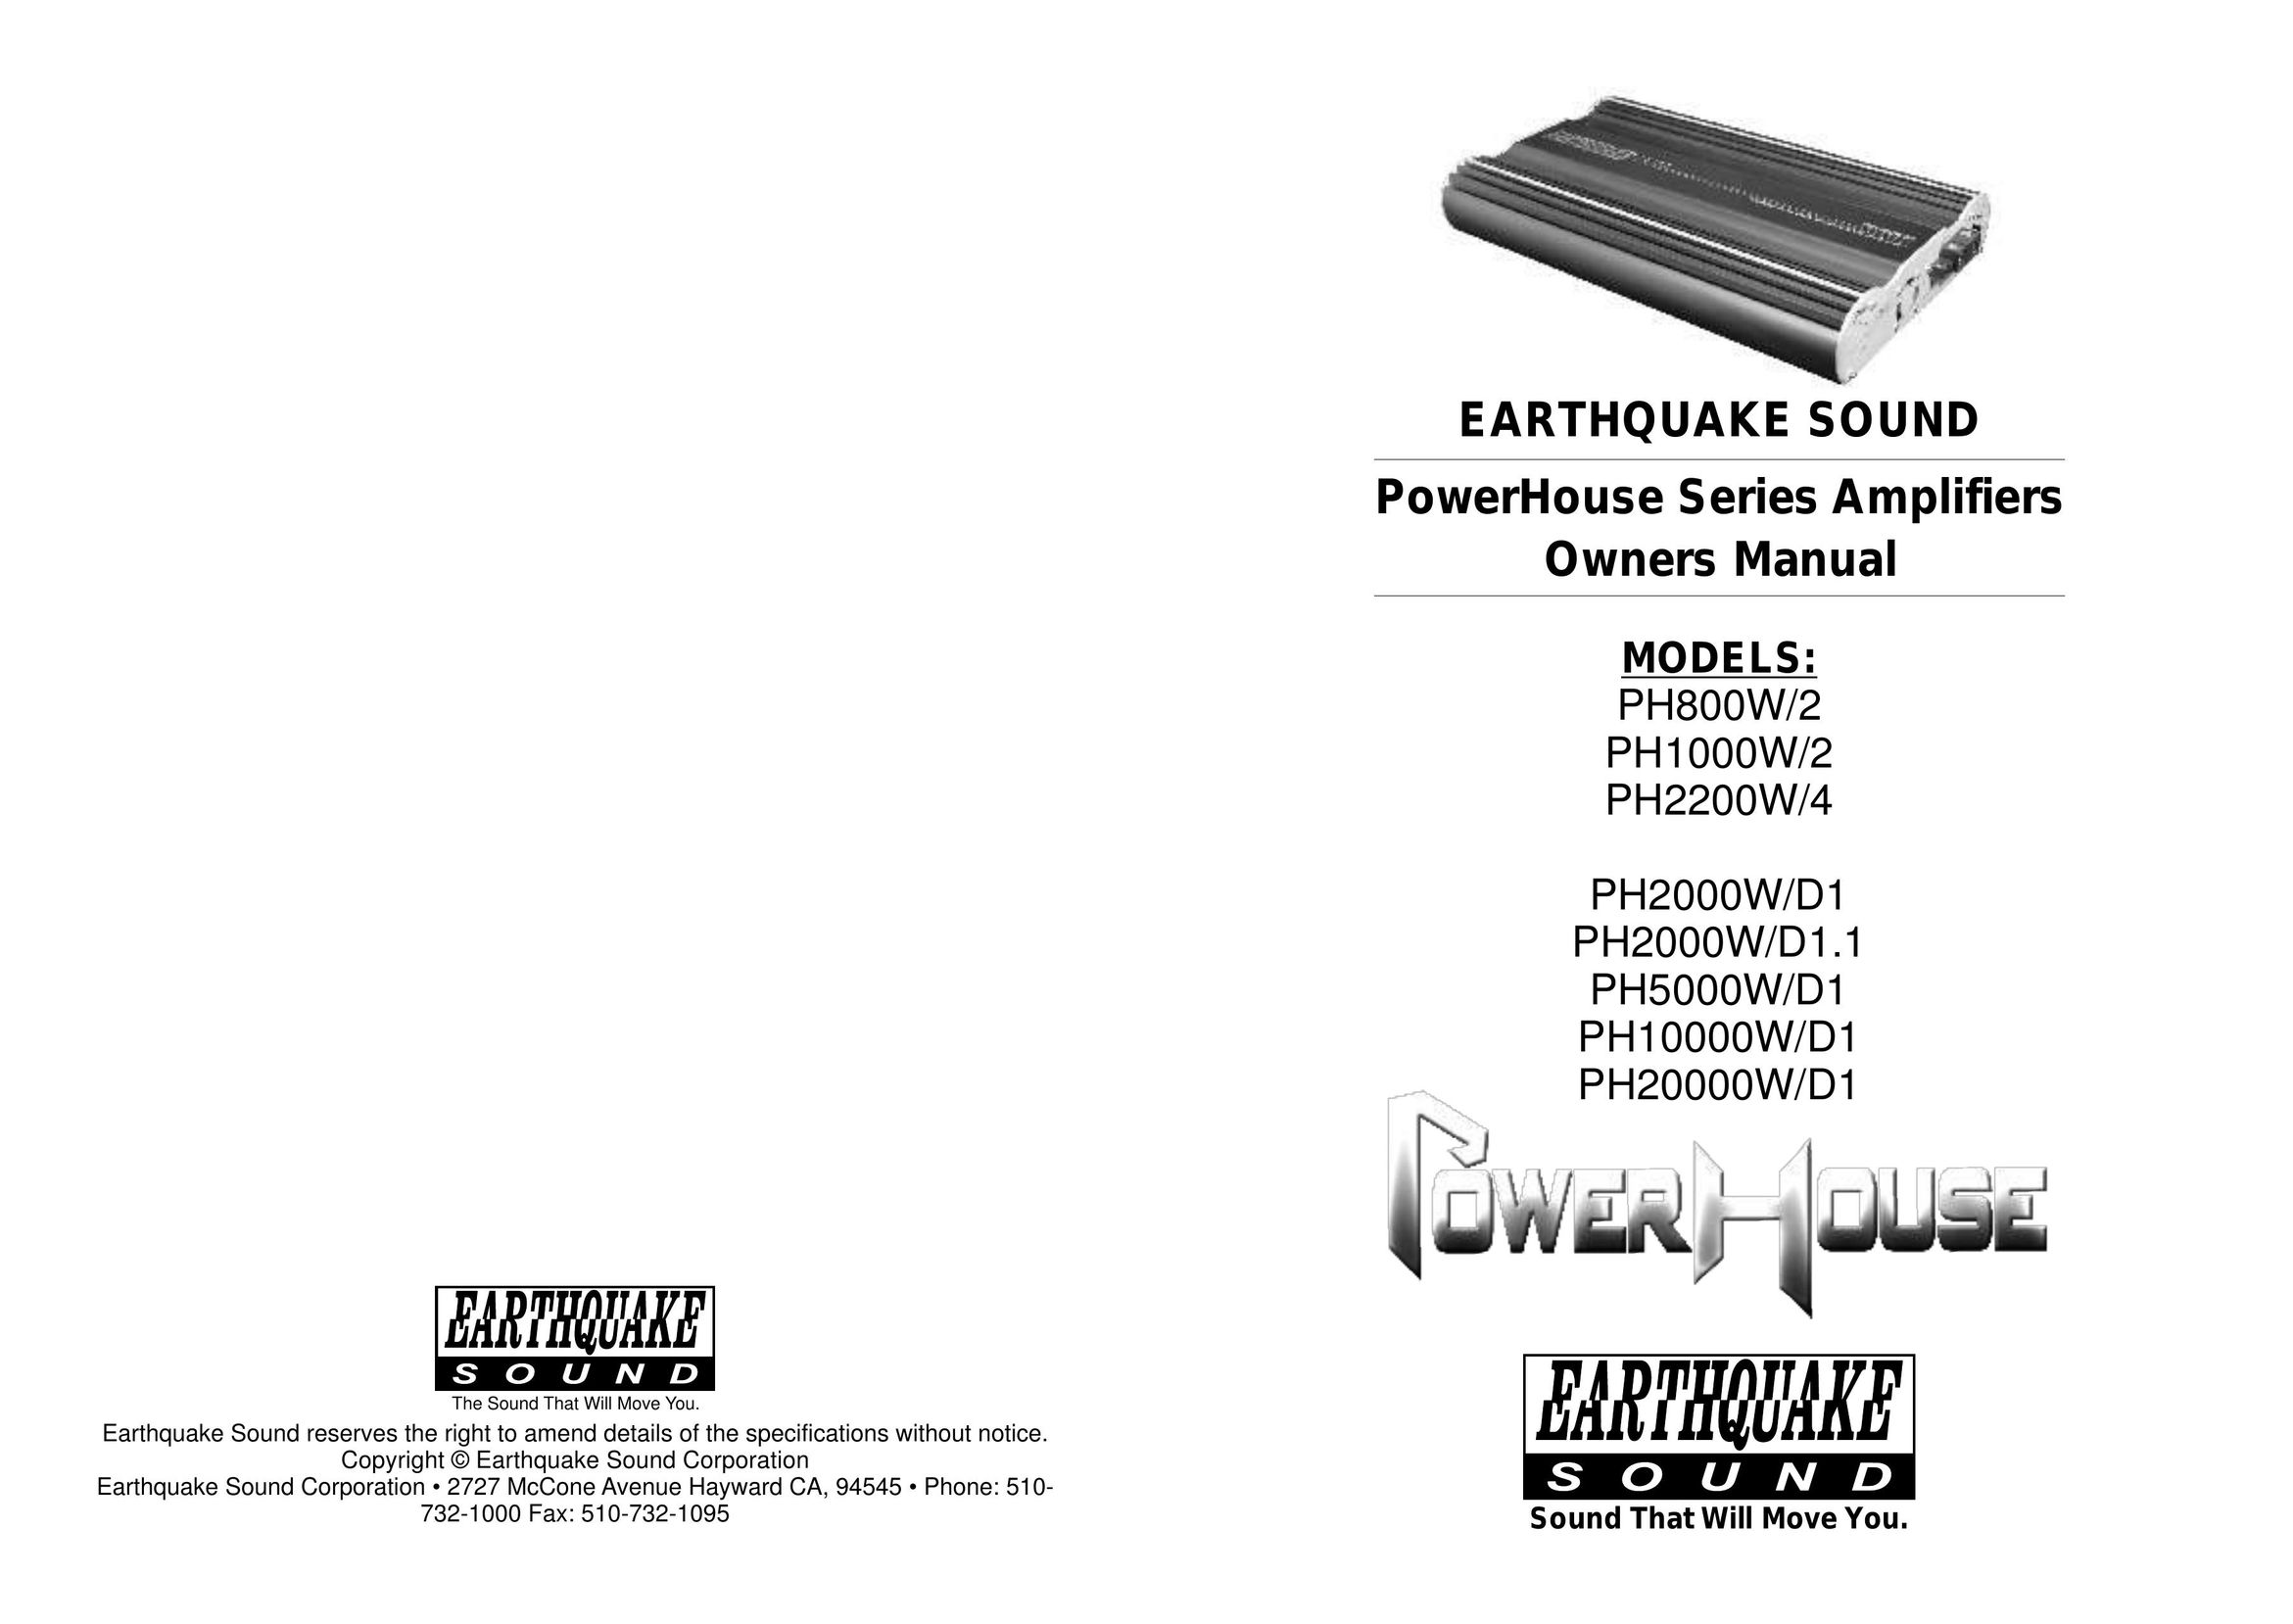 Earthquake Sound PH2200W/4 Stereo Amplifier User Manual